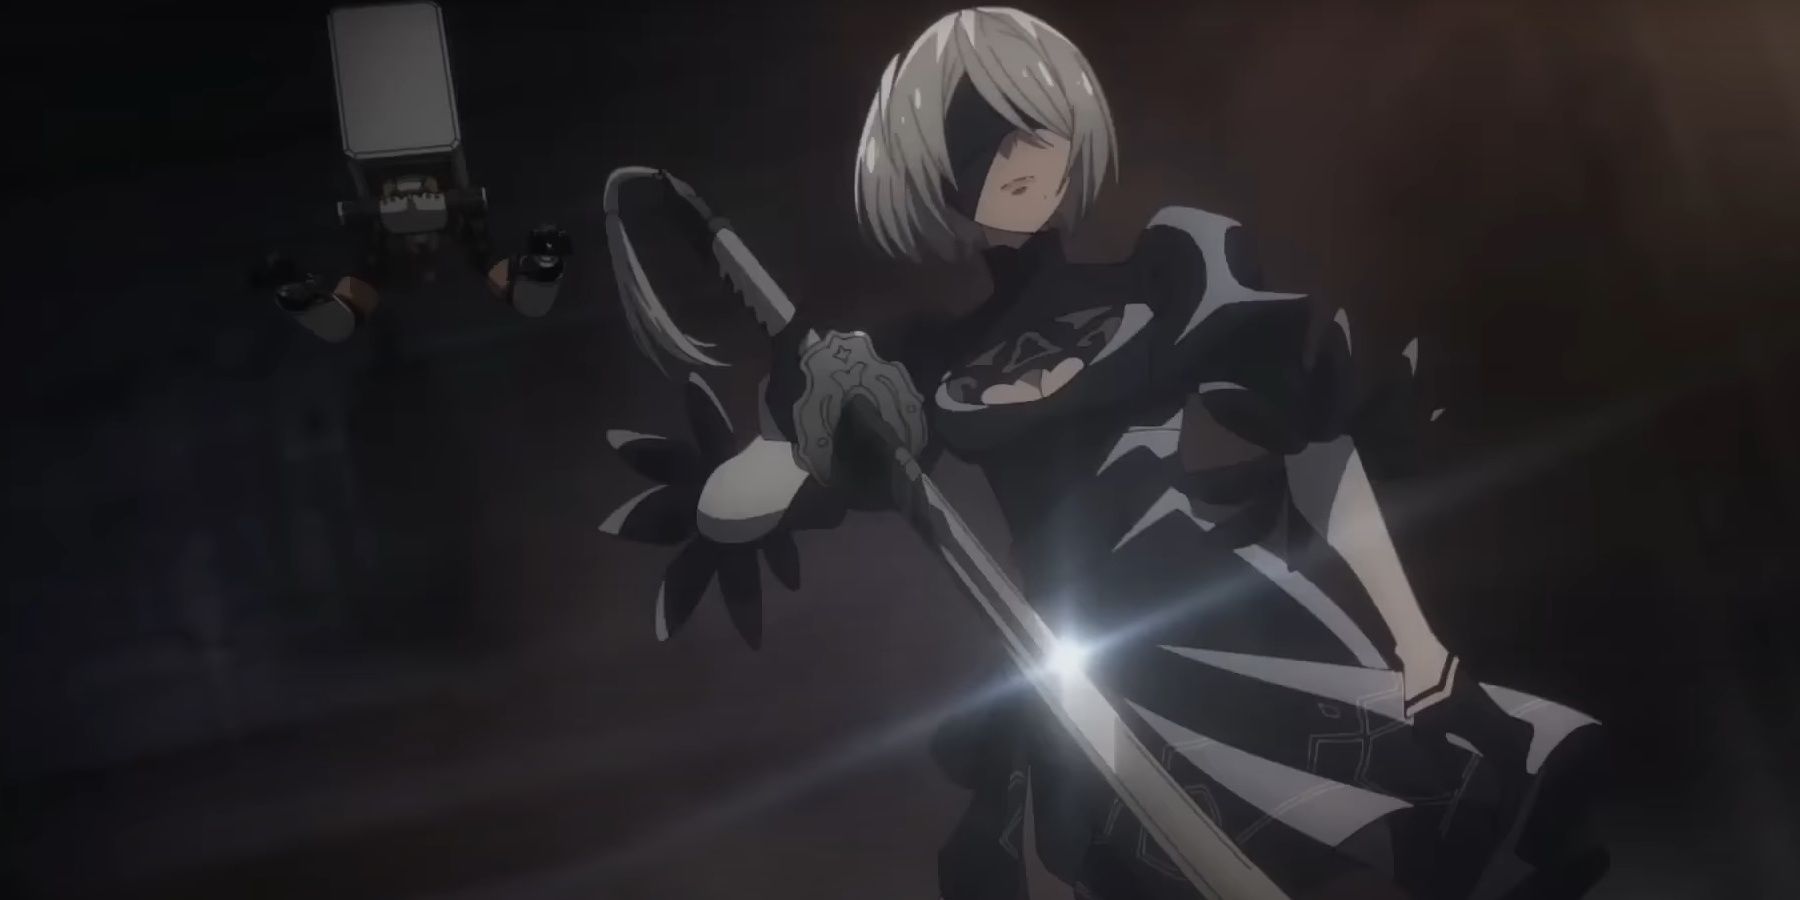 first look at 2B in the nier automata version 1.1a anime 